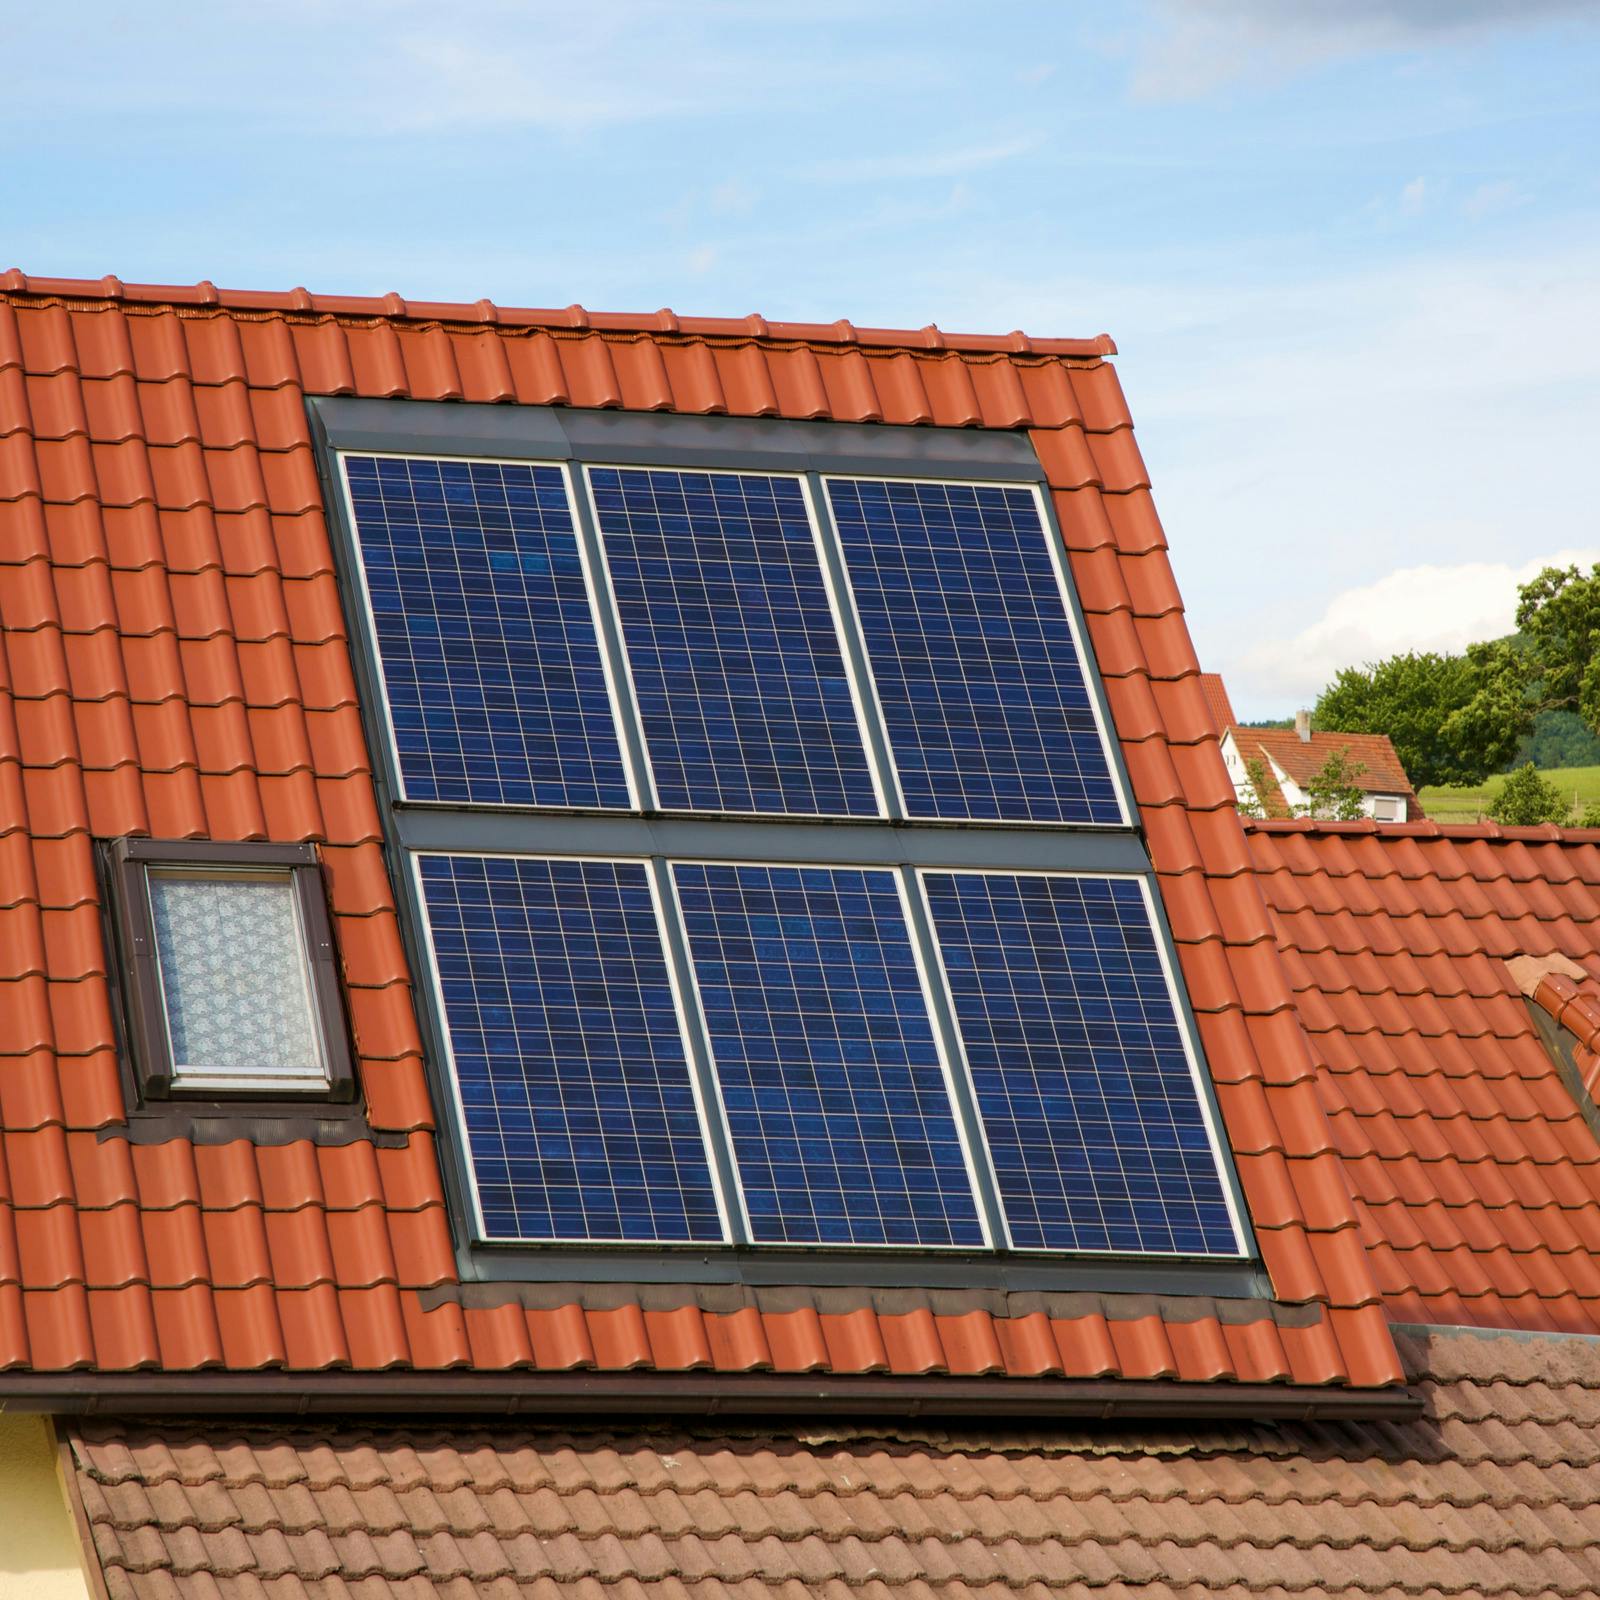 Solar panel services Derbyshire, South Yorkshire and Nottinghamshire